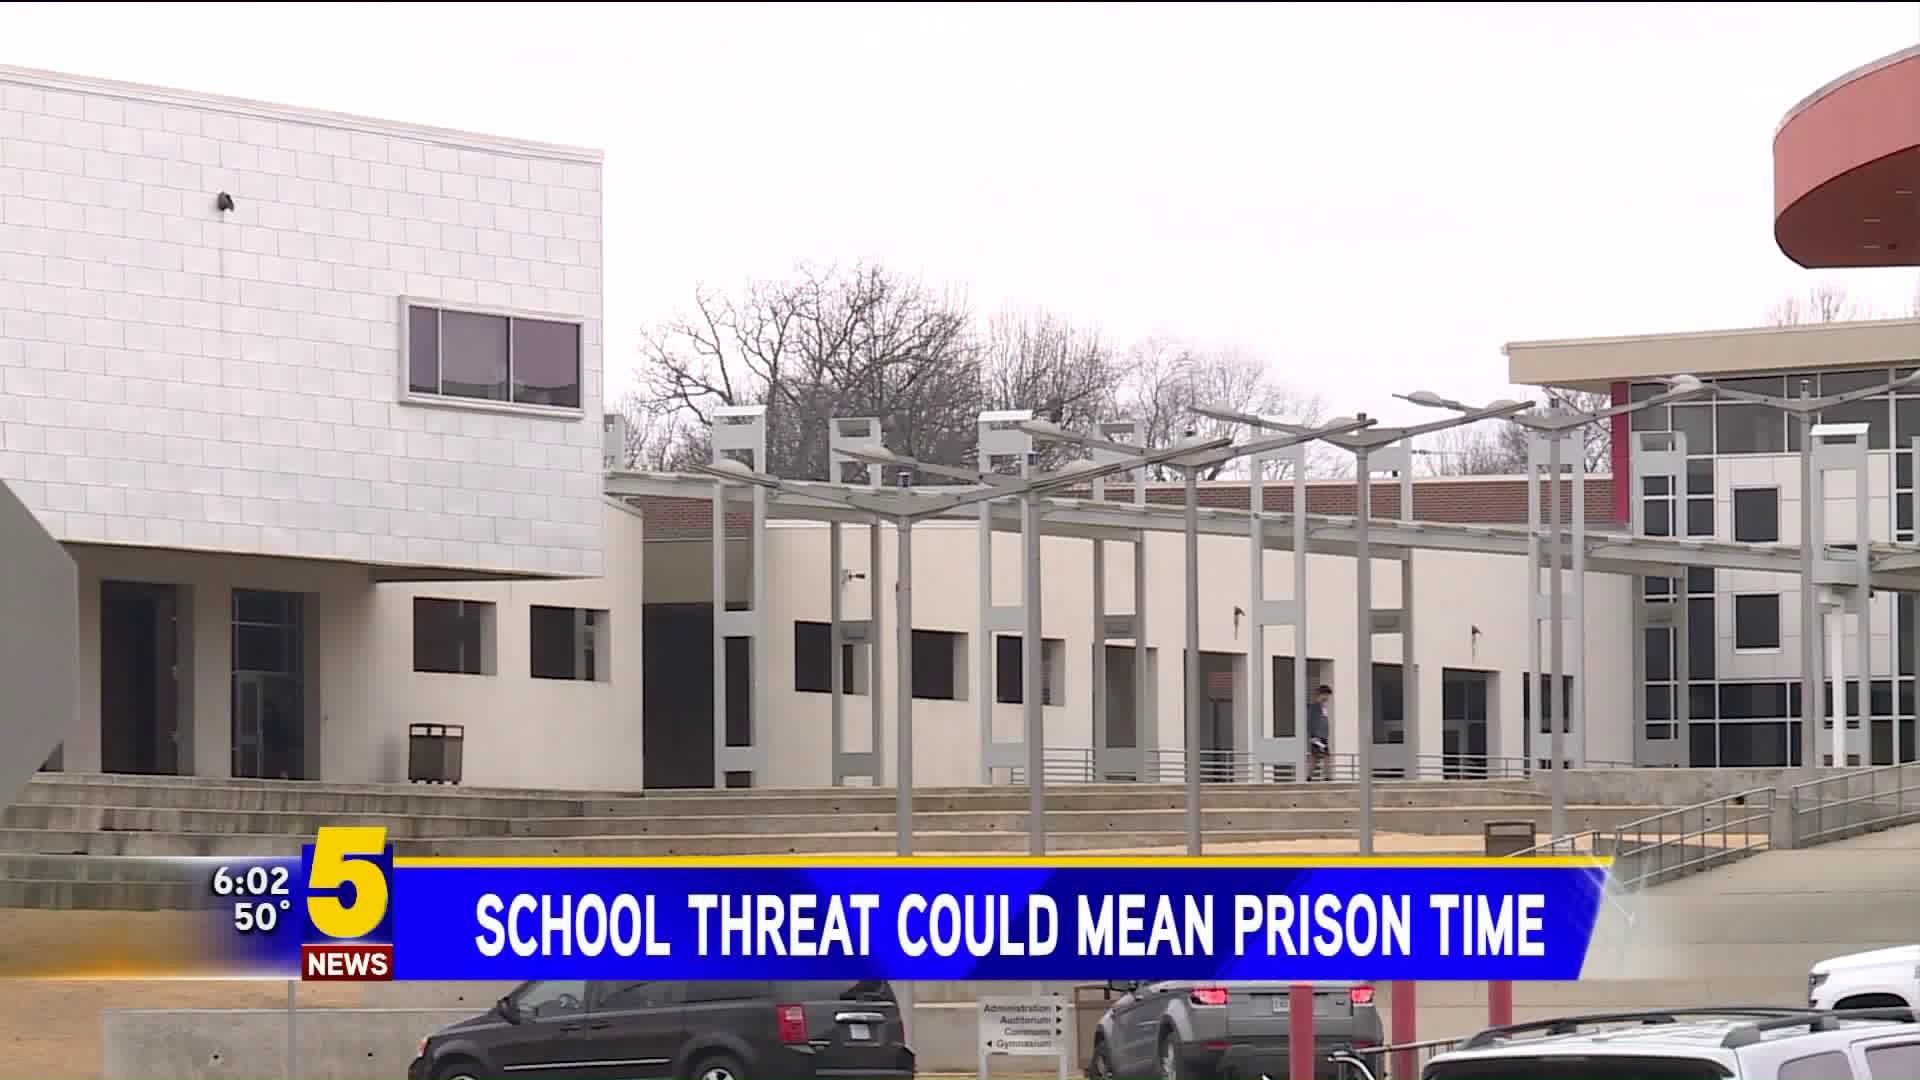 School Threat Could Mean Prison Time